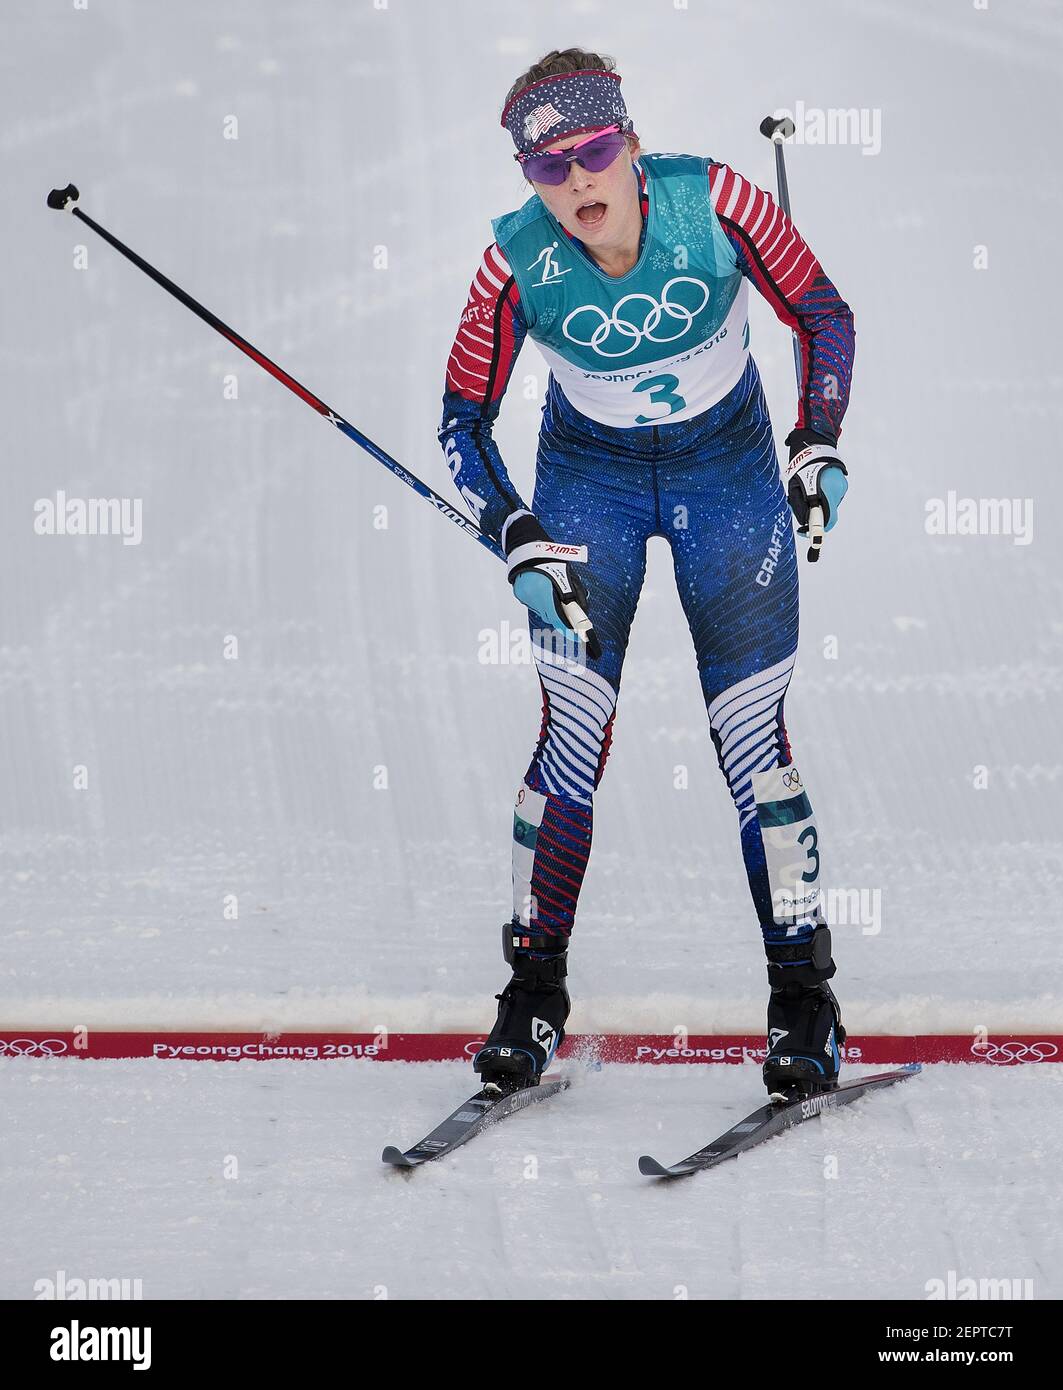 Jessie Diggins (3) from Afton, Minn., crosses the finish line during the women's 7.5km + 7.5km Skiathlon at Alpensia Cross-Country Skiing Centre on Saturday, Feb. 10, 2018, at the Pyeongchang Winter Olympics. Diggins placed fifth in the event. (Photo by Carlos Gonzalez/Minneapolis Star Tribune/TNS/Sipa USA) Stock Photo